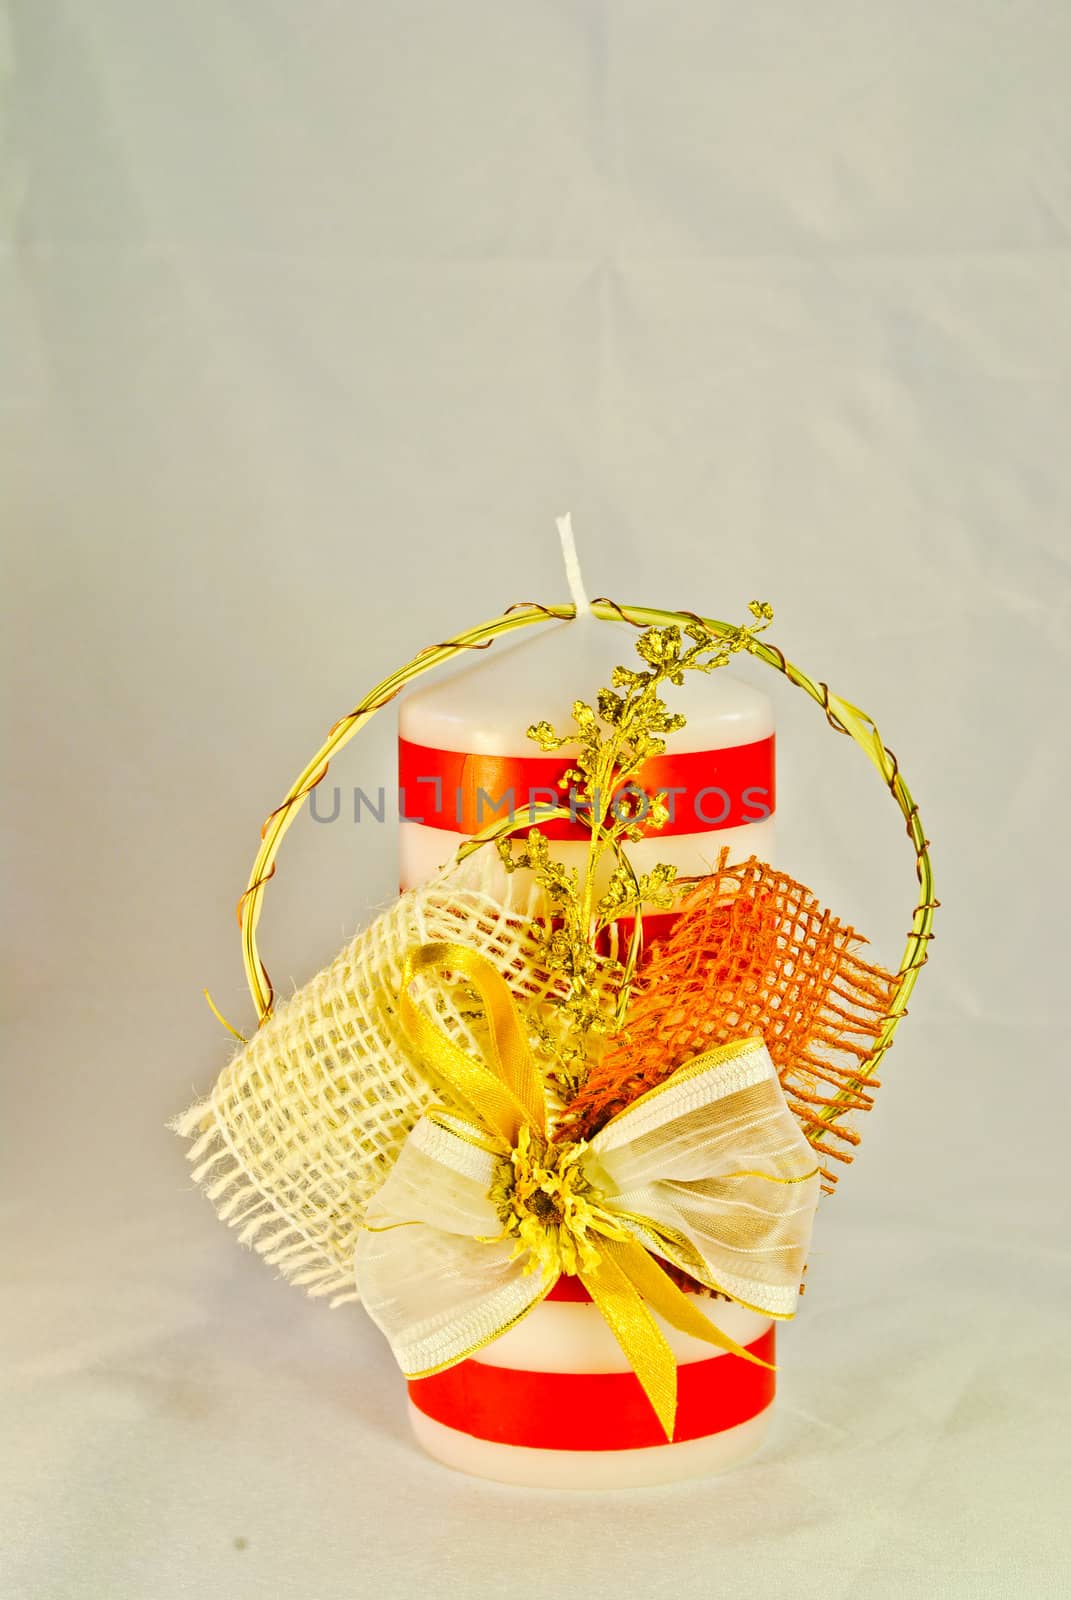 Red and white striped candle with a bow